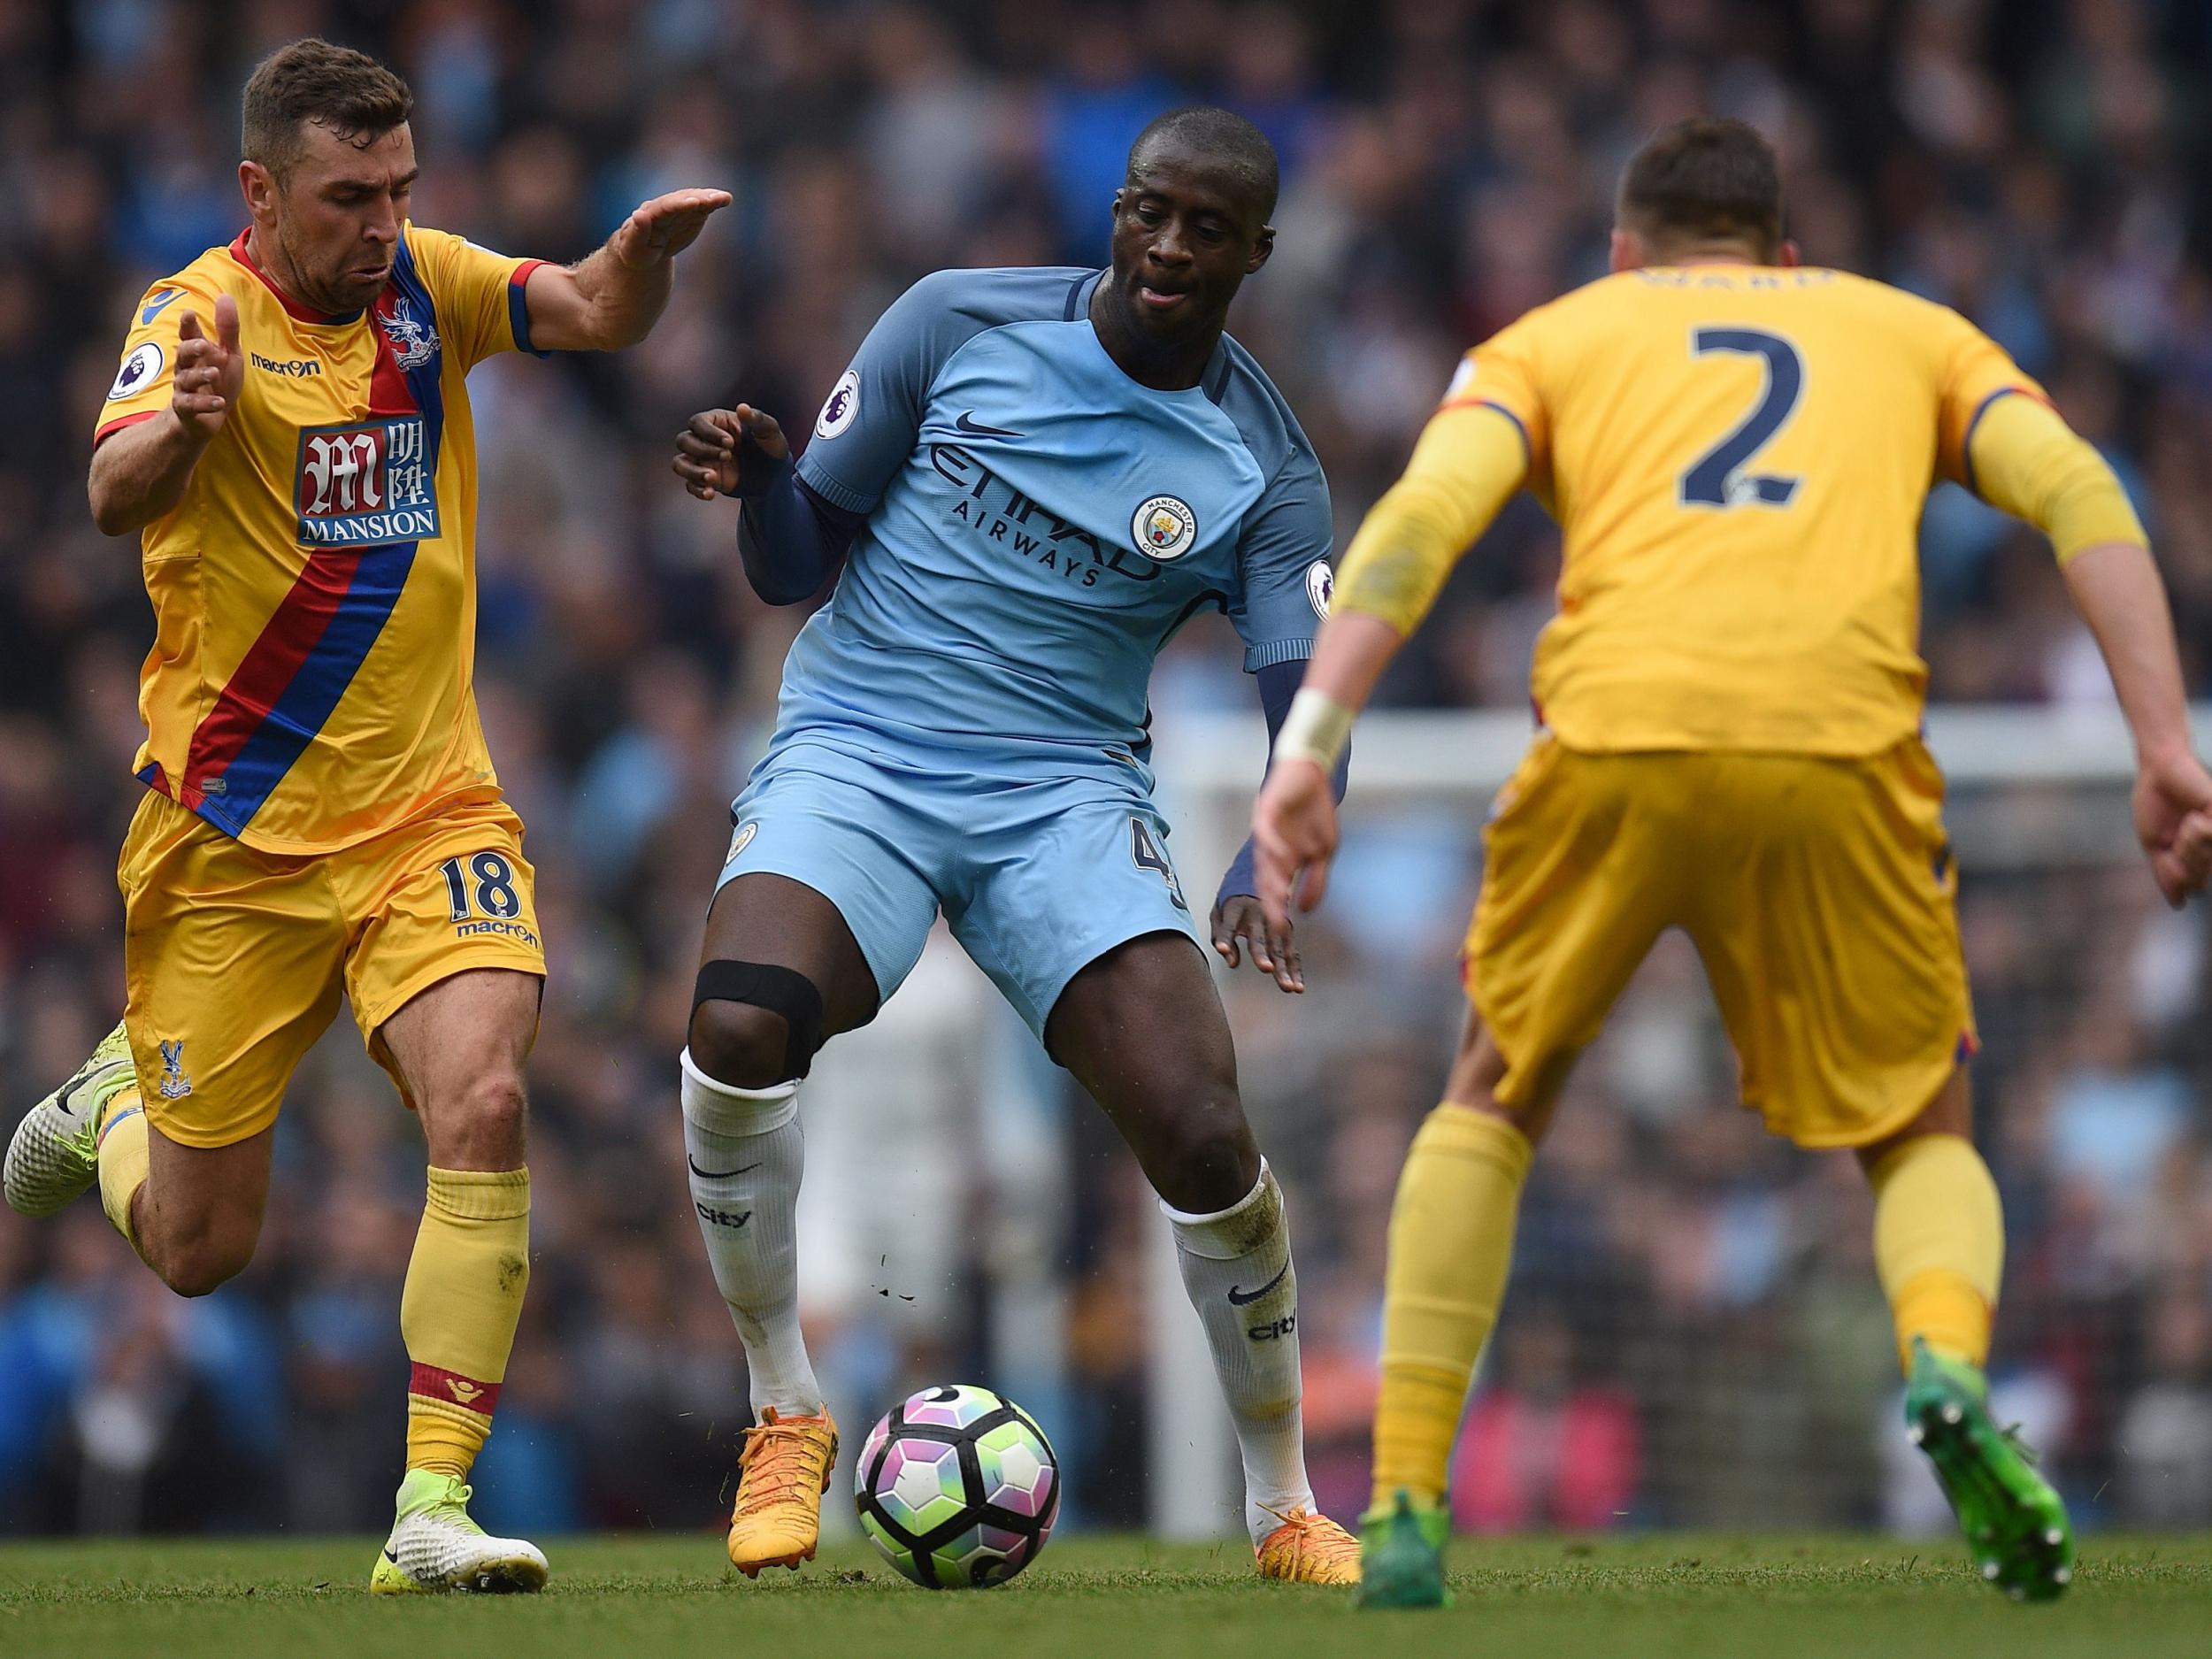 &#13;
Toure in action for City against Palace &#13;